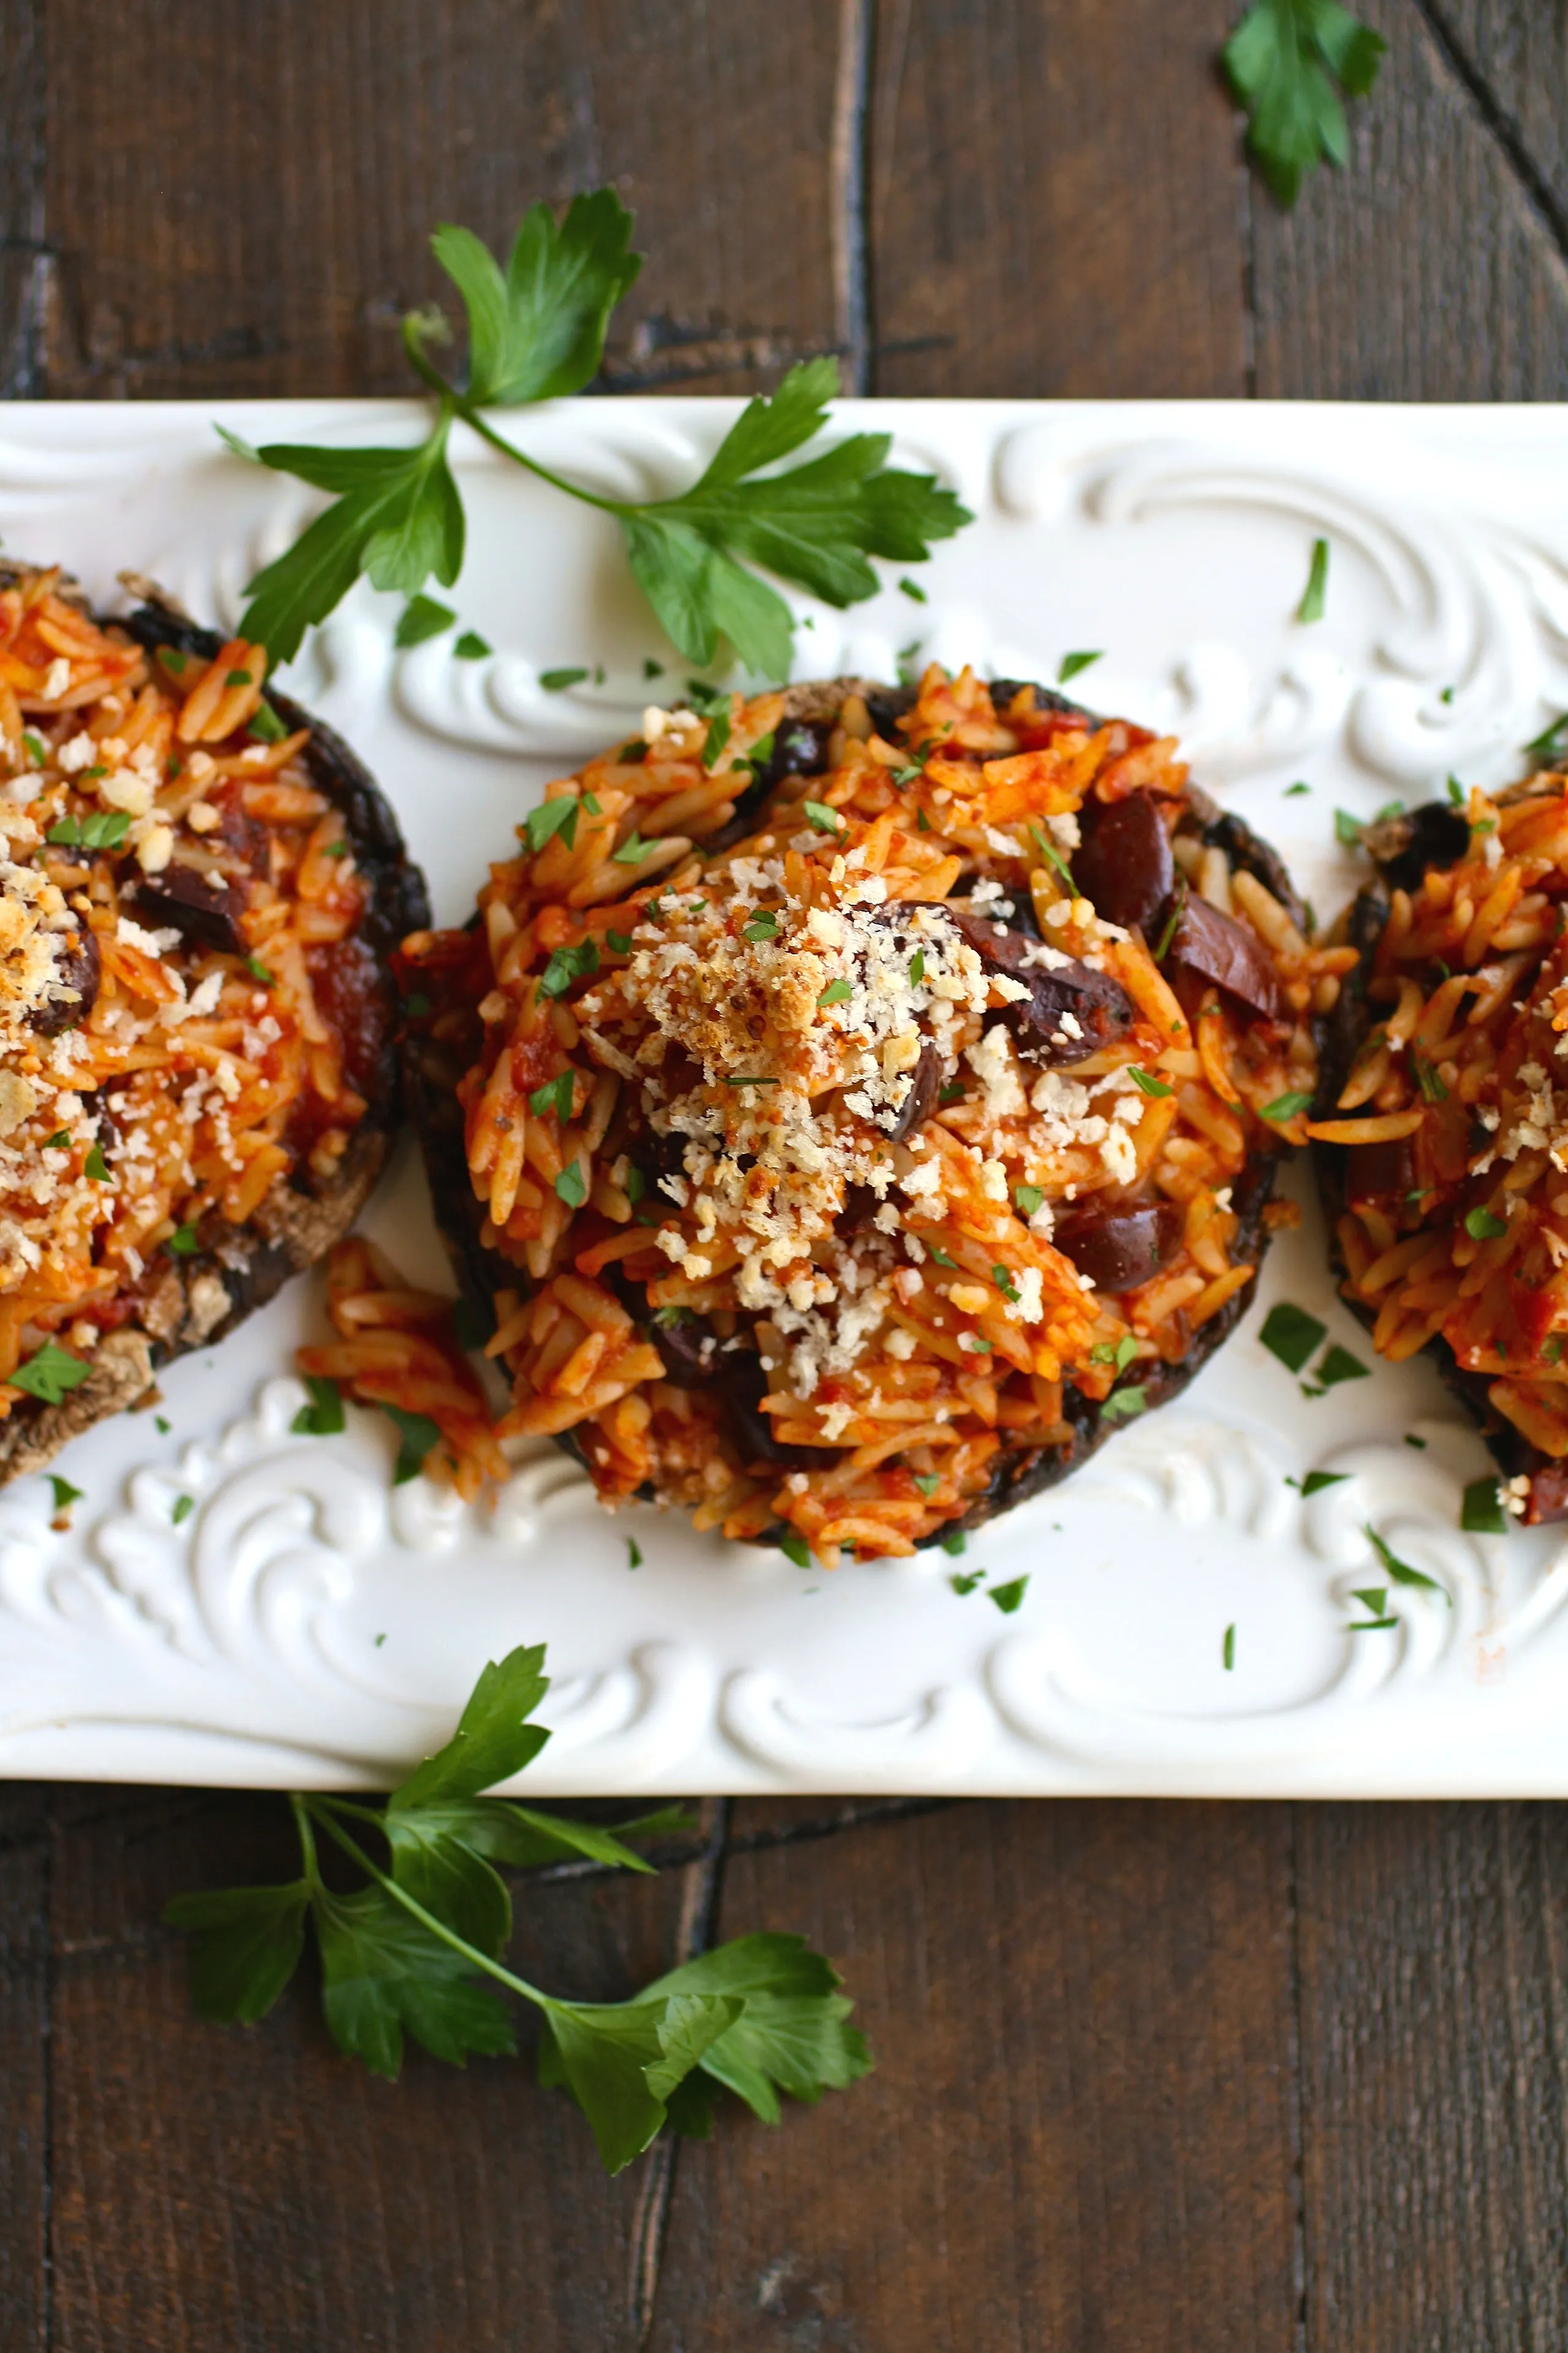 Dig in! This recipe for Orzo & Olive Stuffed Portobello Mushrooms is delicious!